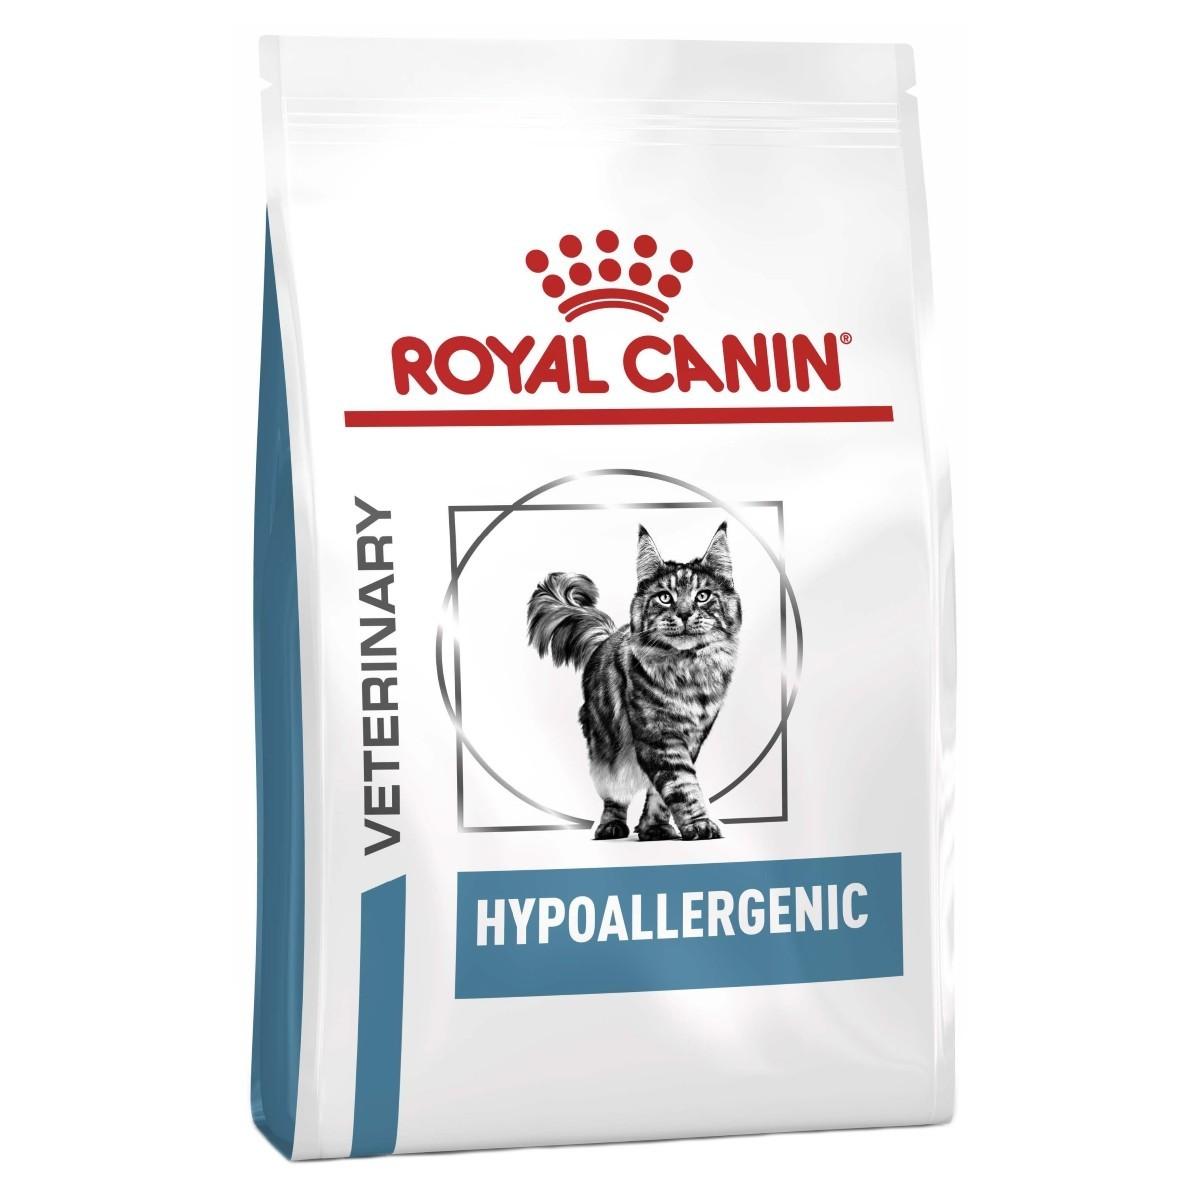 Selected image for ROYAL CANIN Hypoallergenic cat